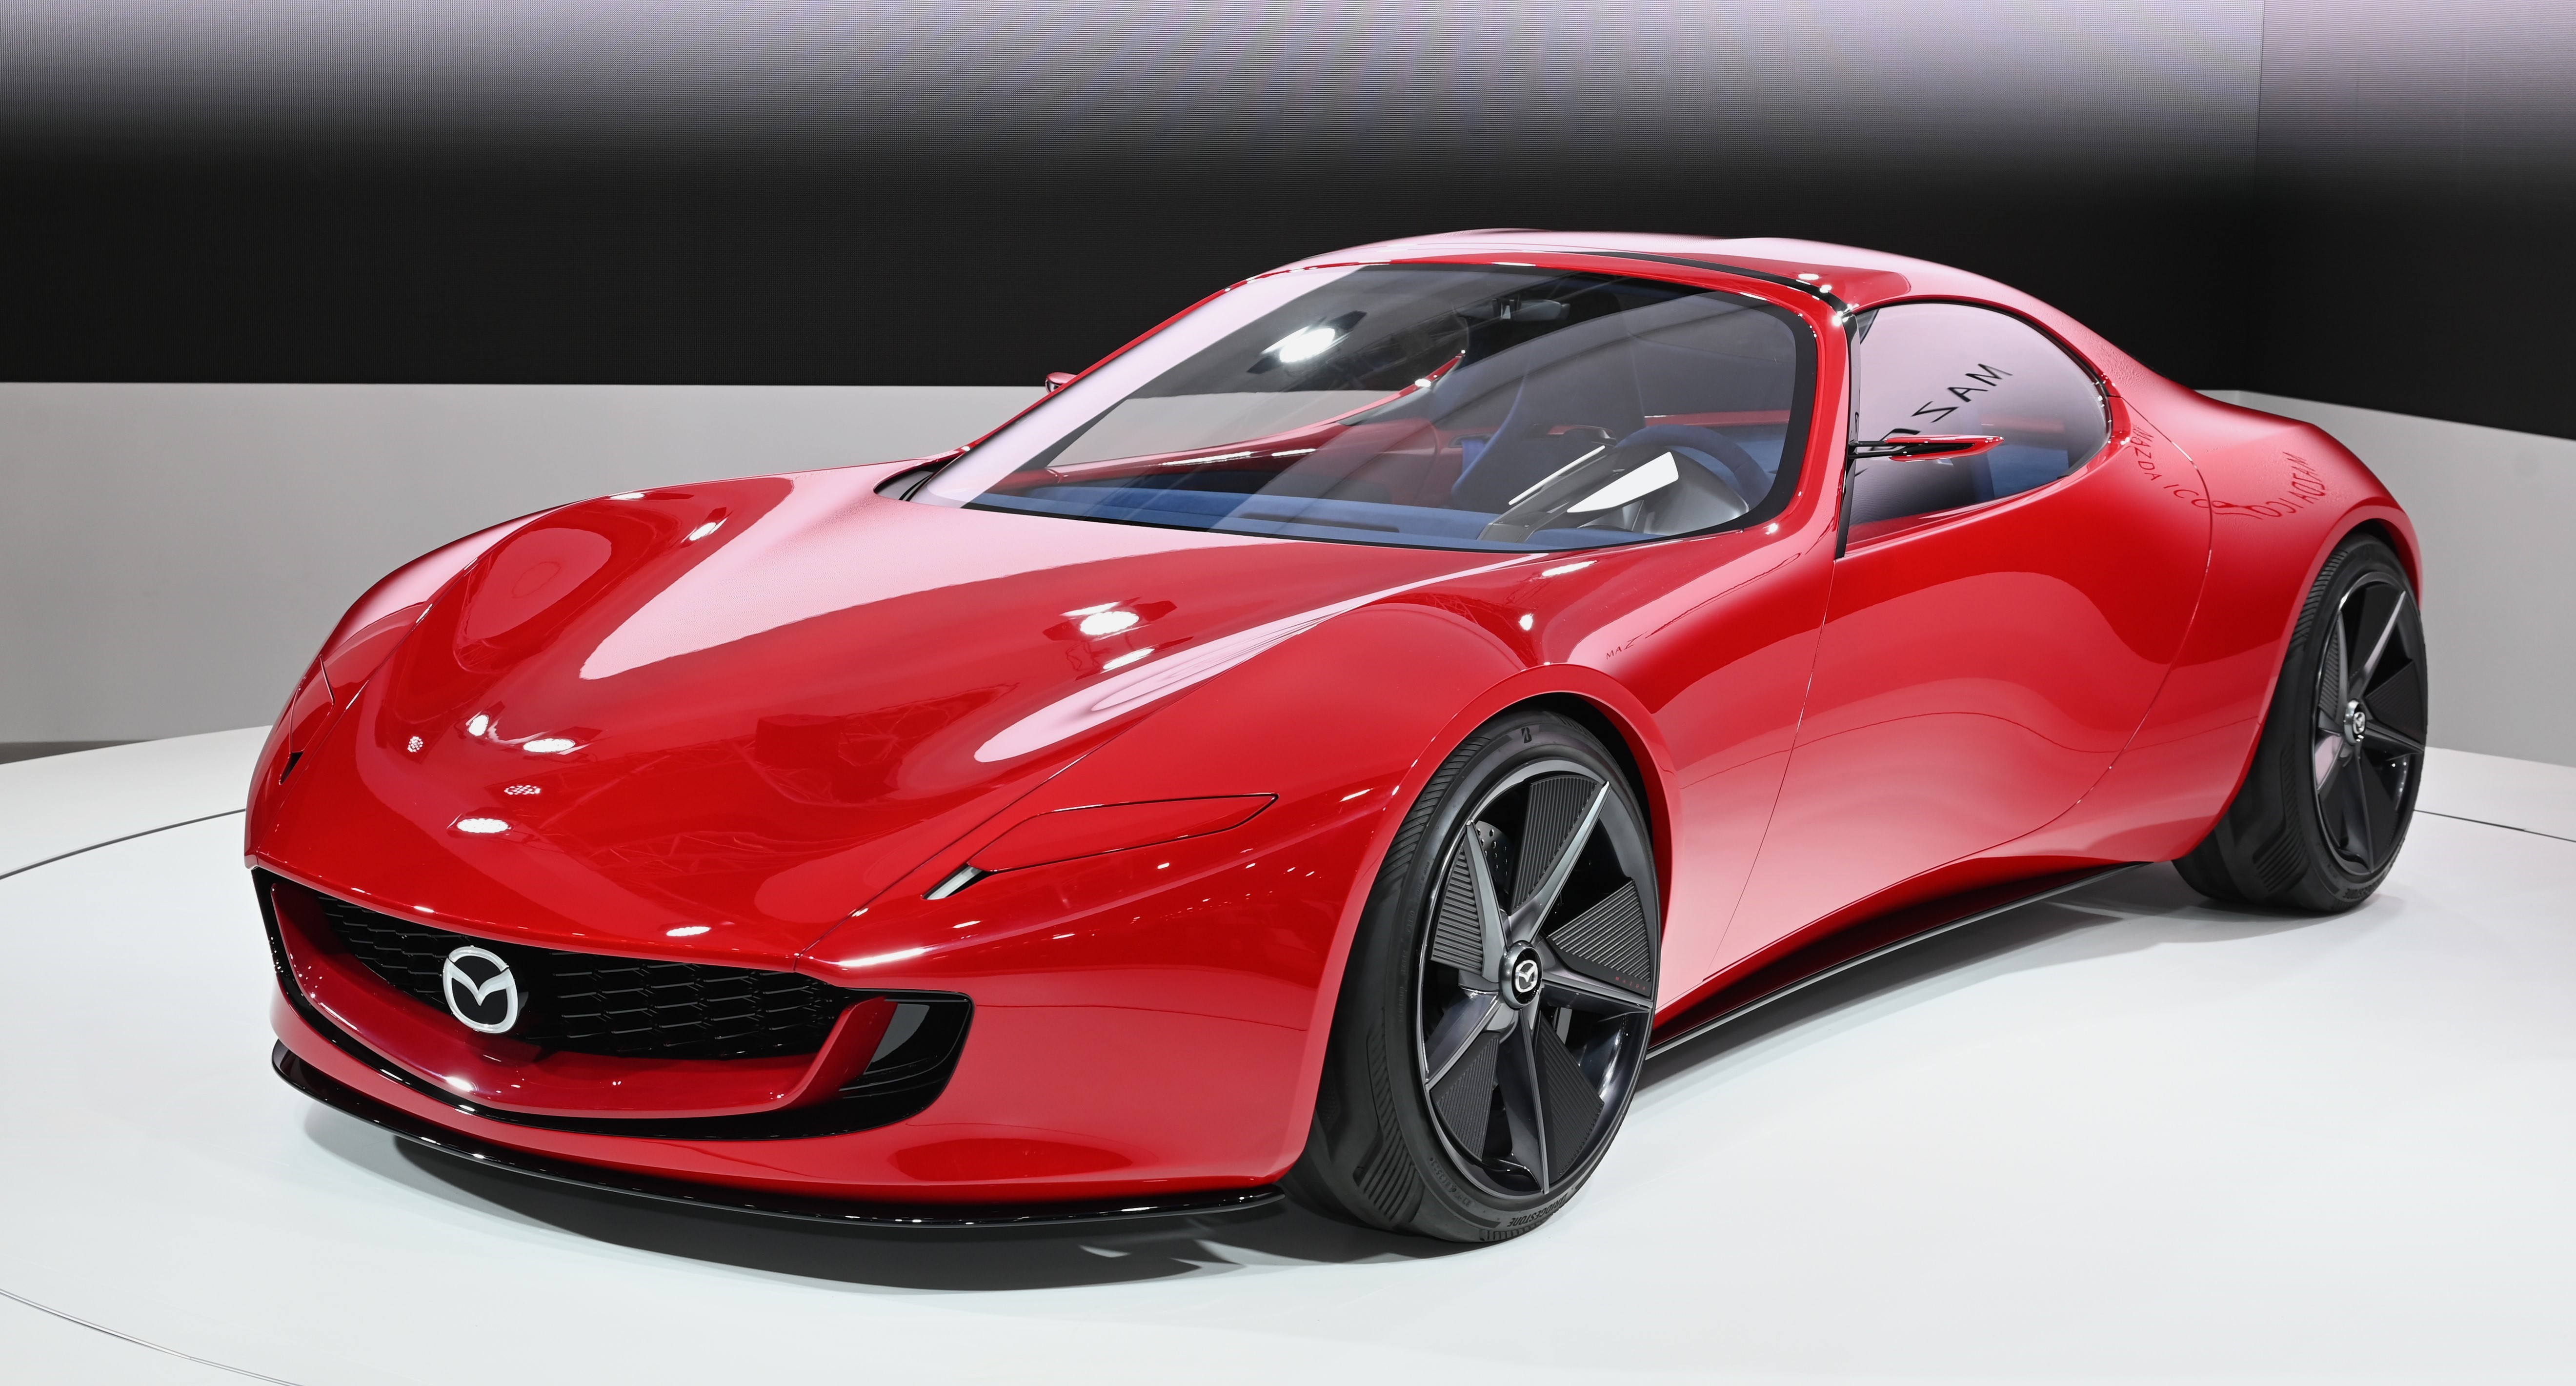 Mazda's gorgeous Iconic SP rotary-EV sports concept transcends time